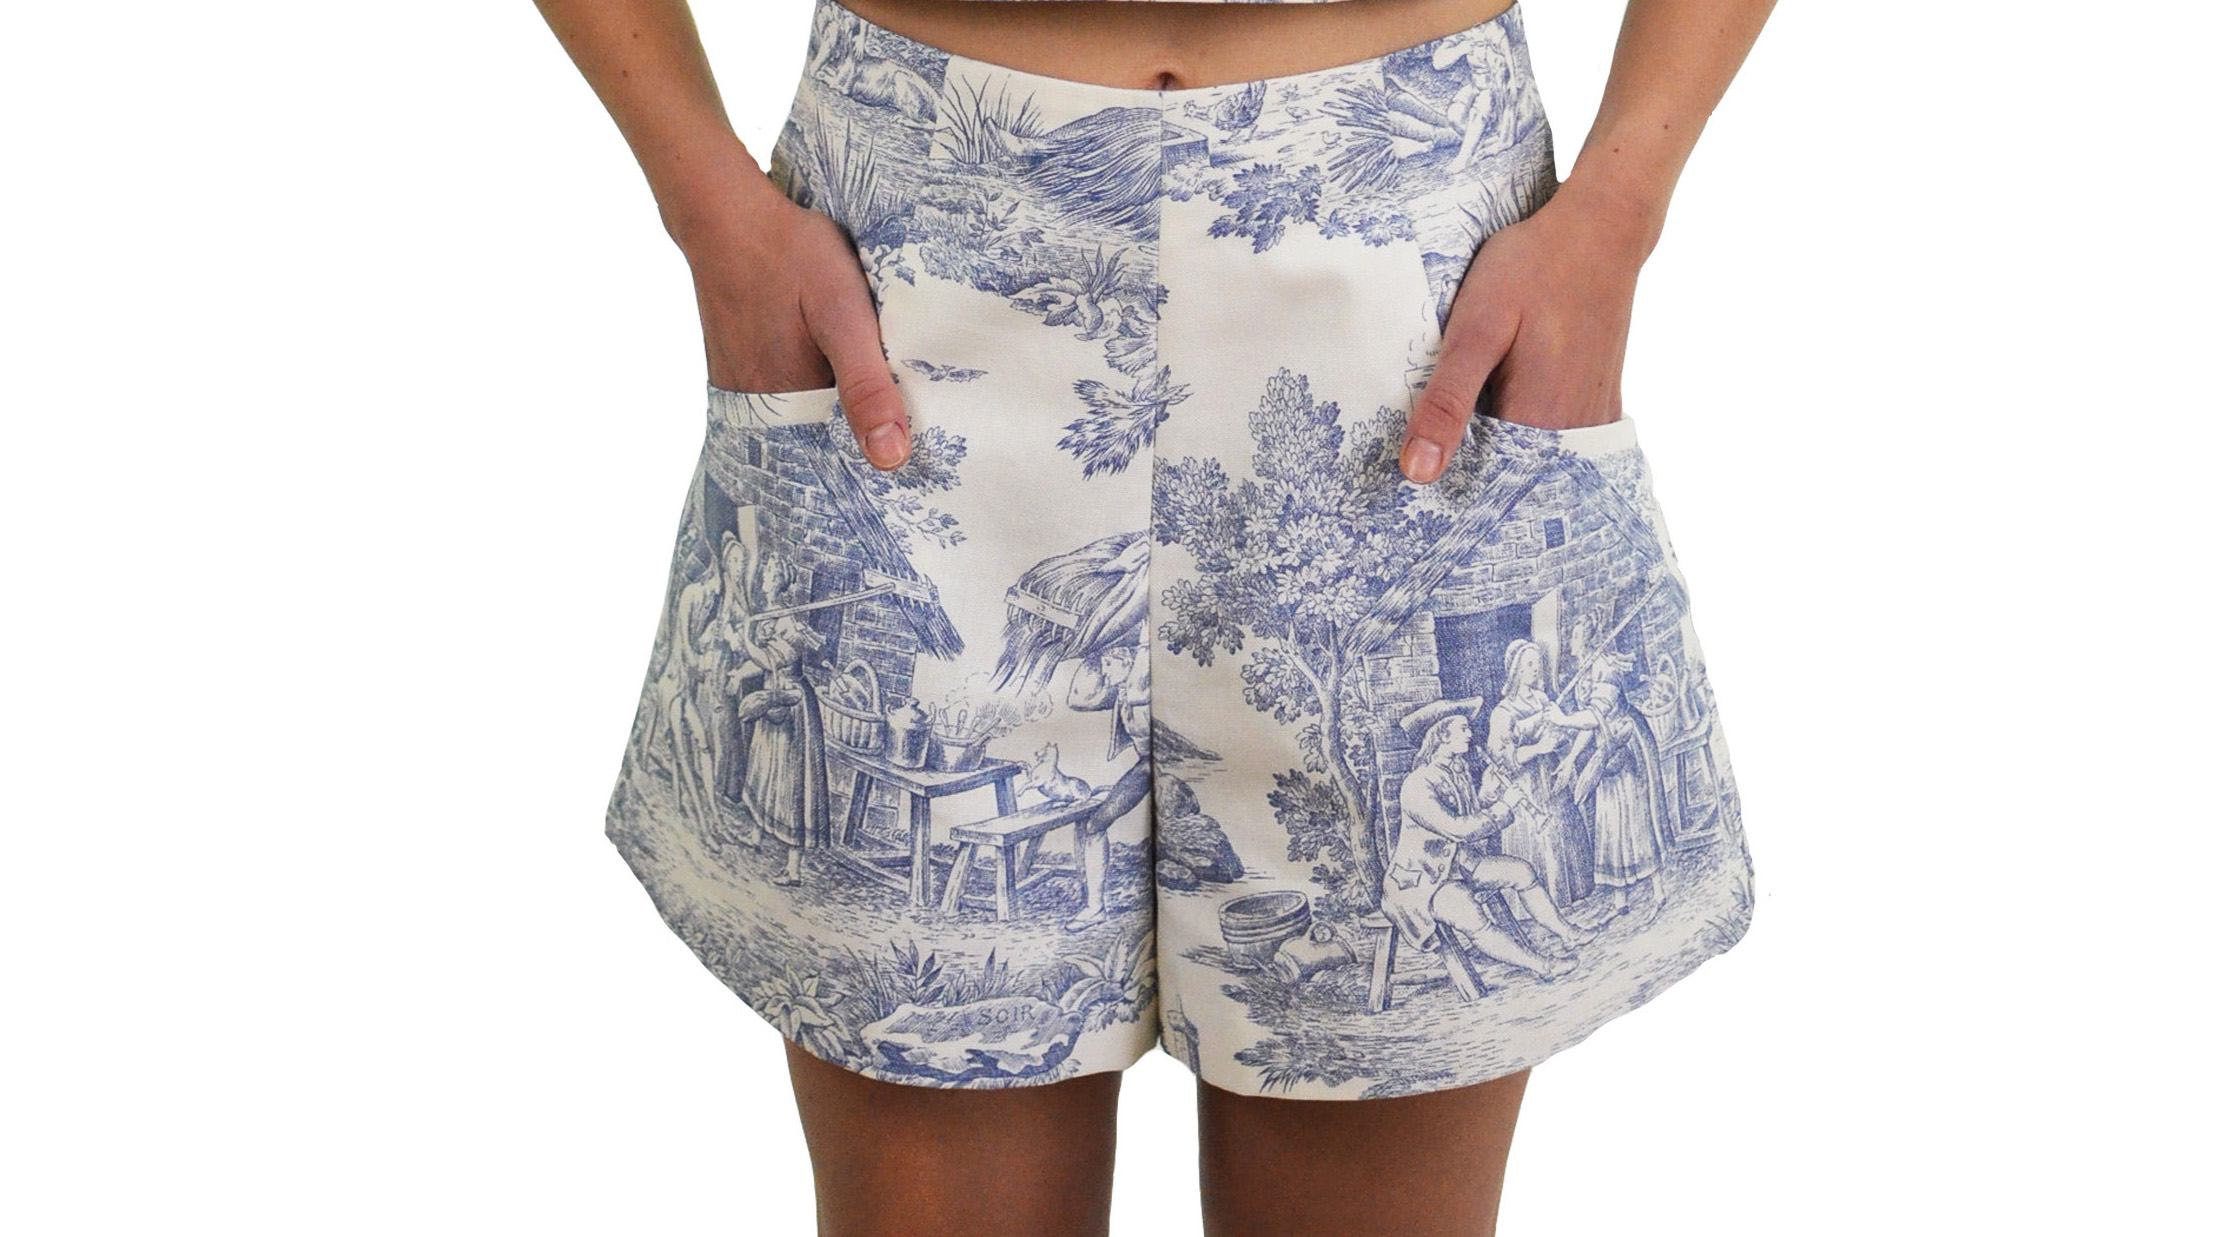 Linen Shorts Toile de Jouy - The Garden Collection by MARCHA